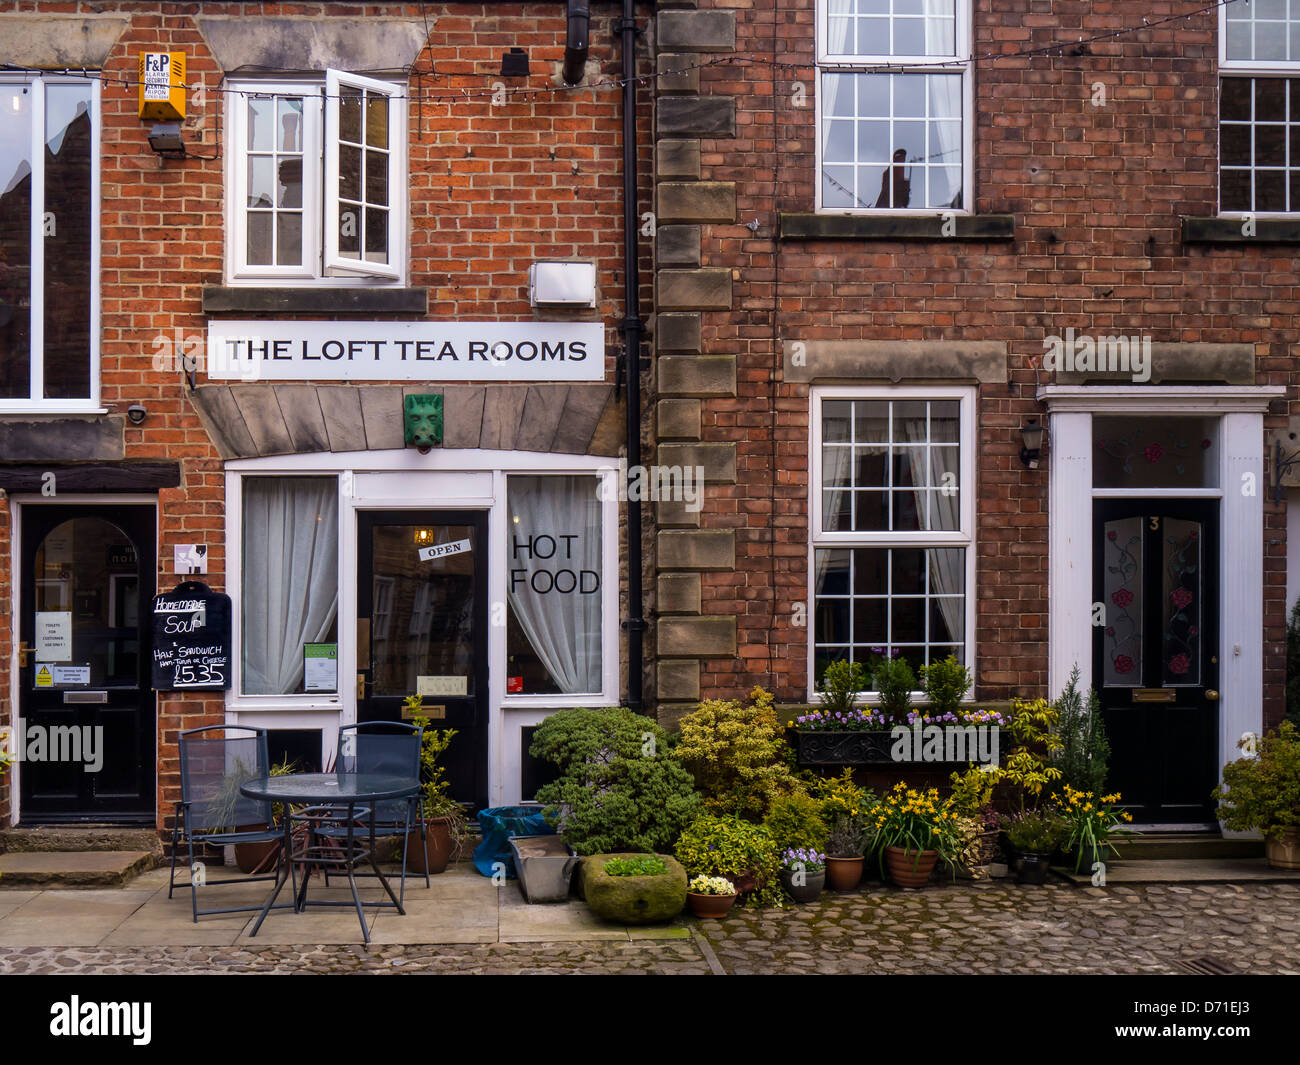 KNARESBOROUGH, NORTH YORKSHIRE - APRIL 19, 2013:  Exterior view of the Loft Tea Room in Thistle Hill Stock Photo